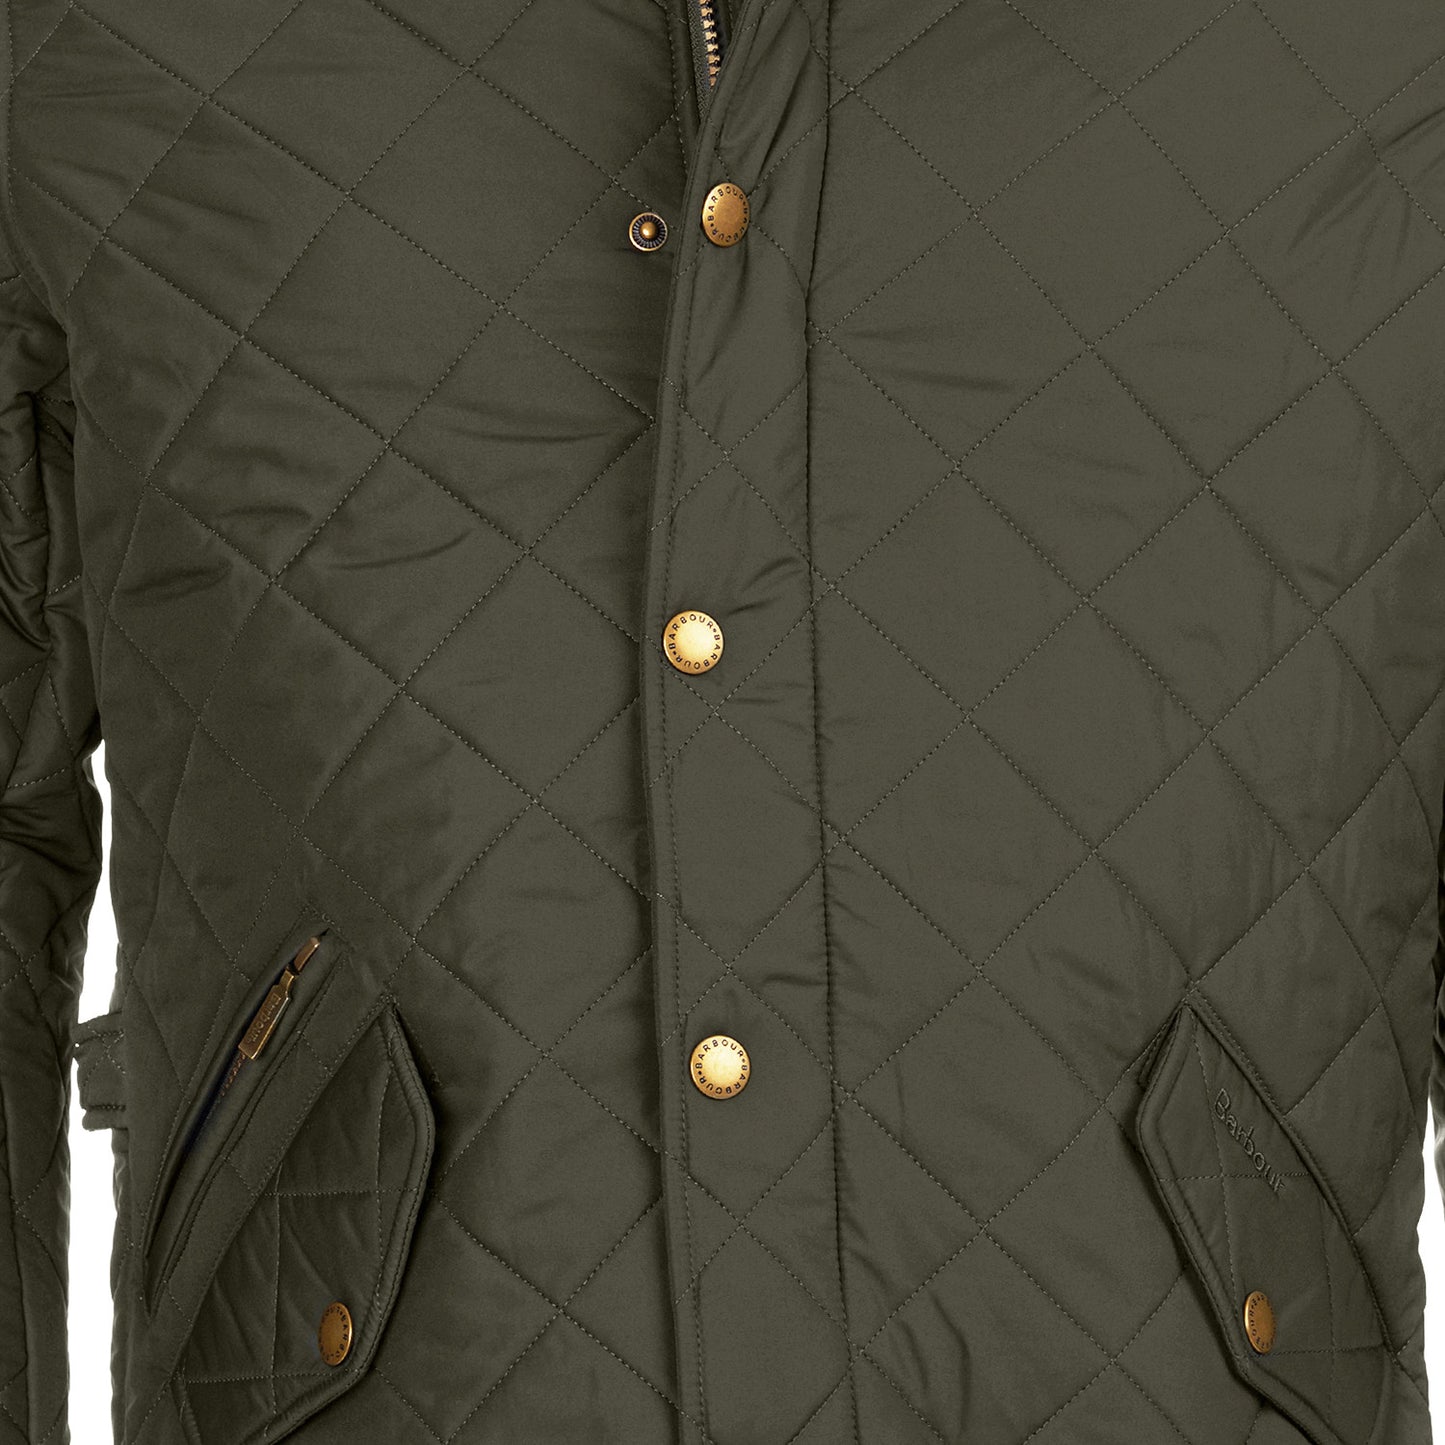 Barbour Powell Green Quilted Jacket